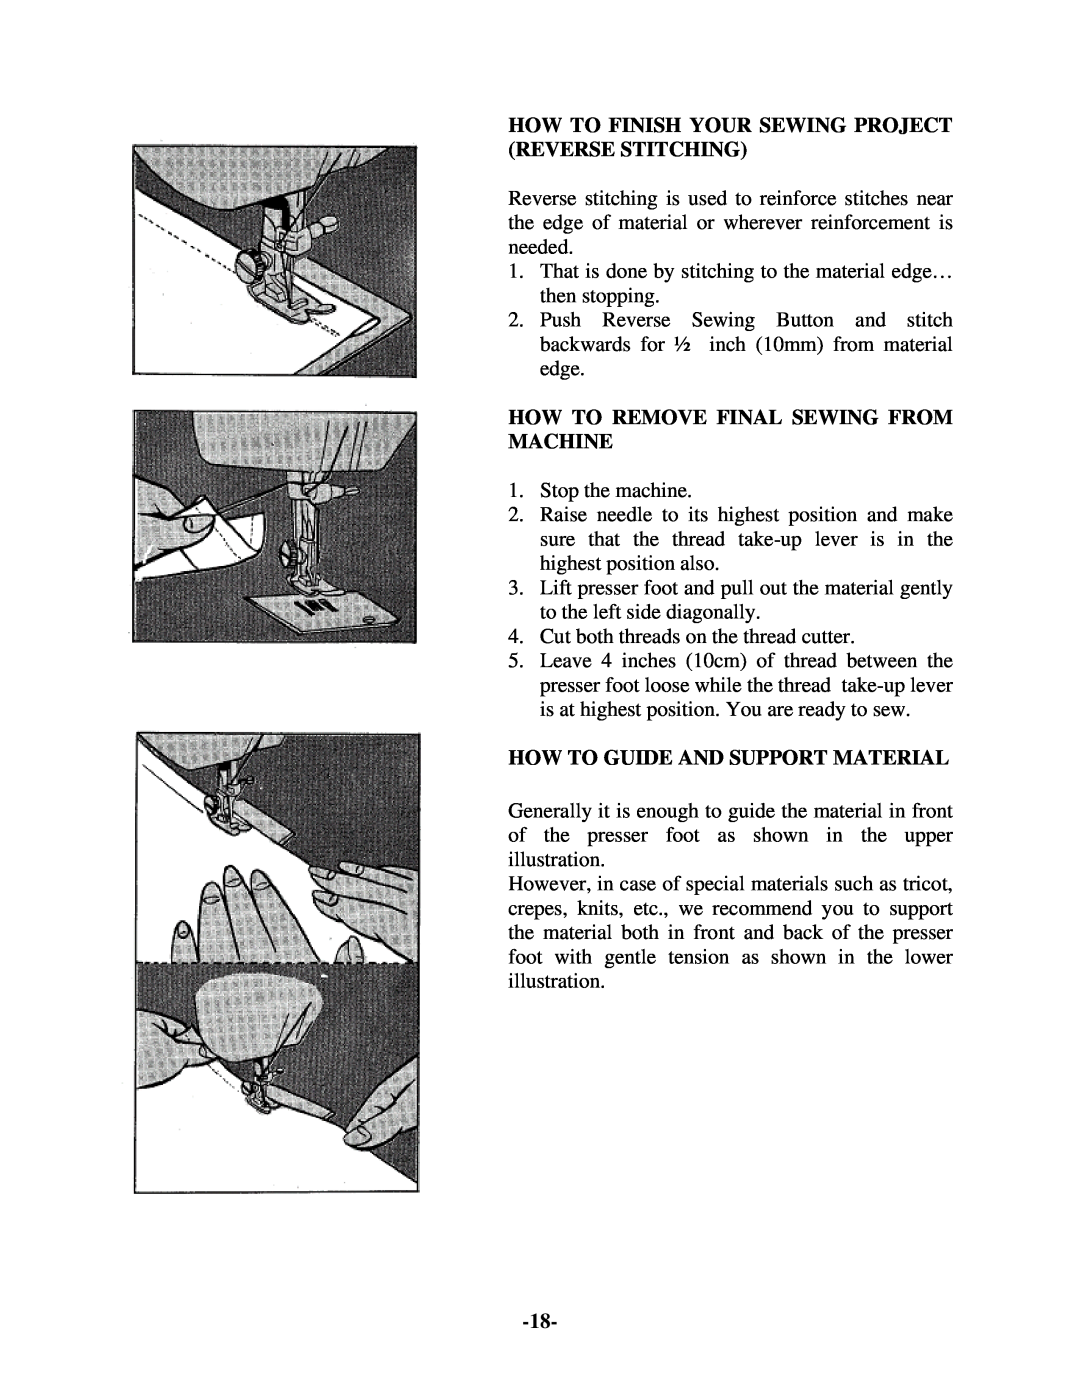 Brother 681B-UG manual How To Finish Your Sewing Project Reverse Stitching, How To Remove Final Sewing From Machine 